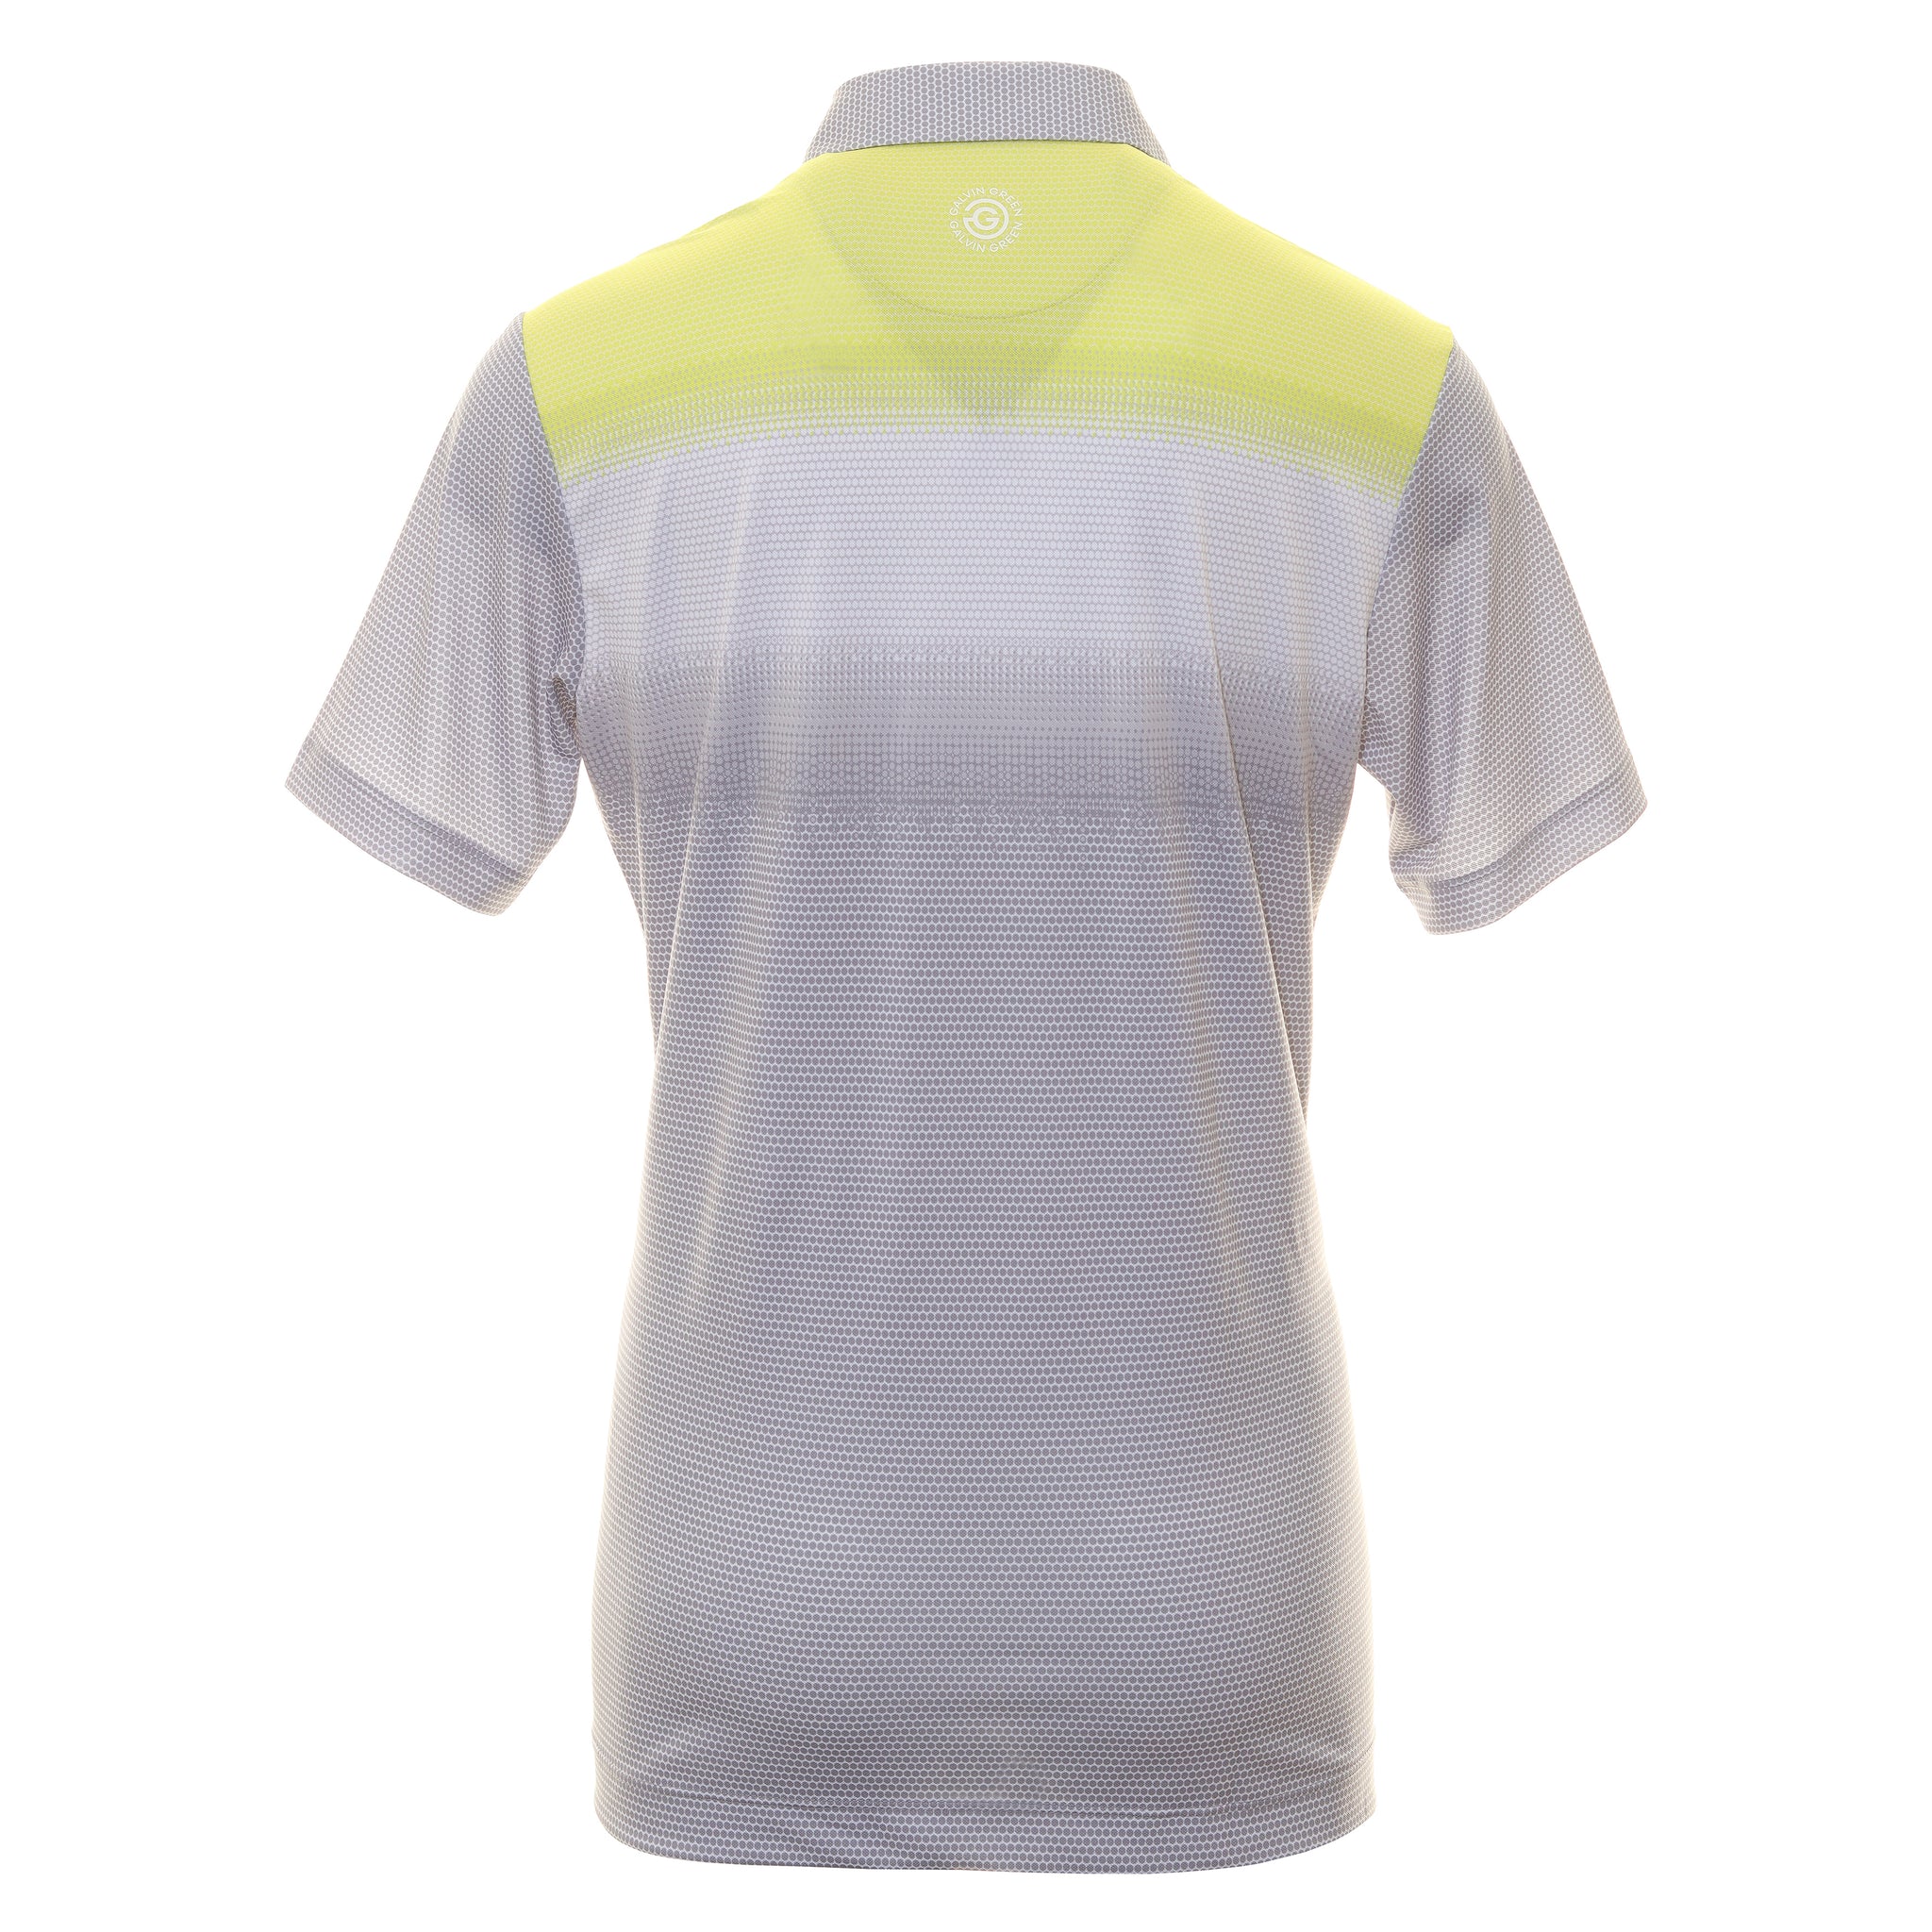 galvin-green-mo-ventil8-golf-shirt-cool-grey-white-sunny-lime-9387